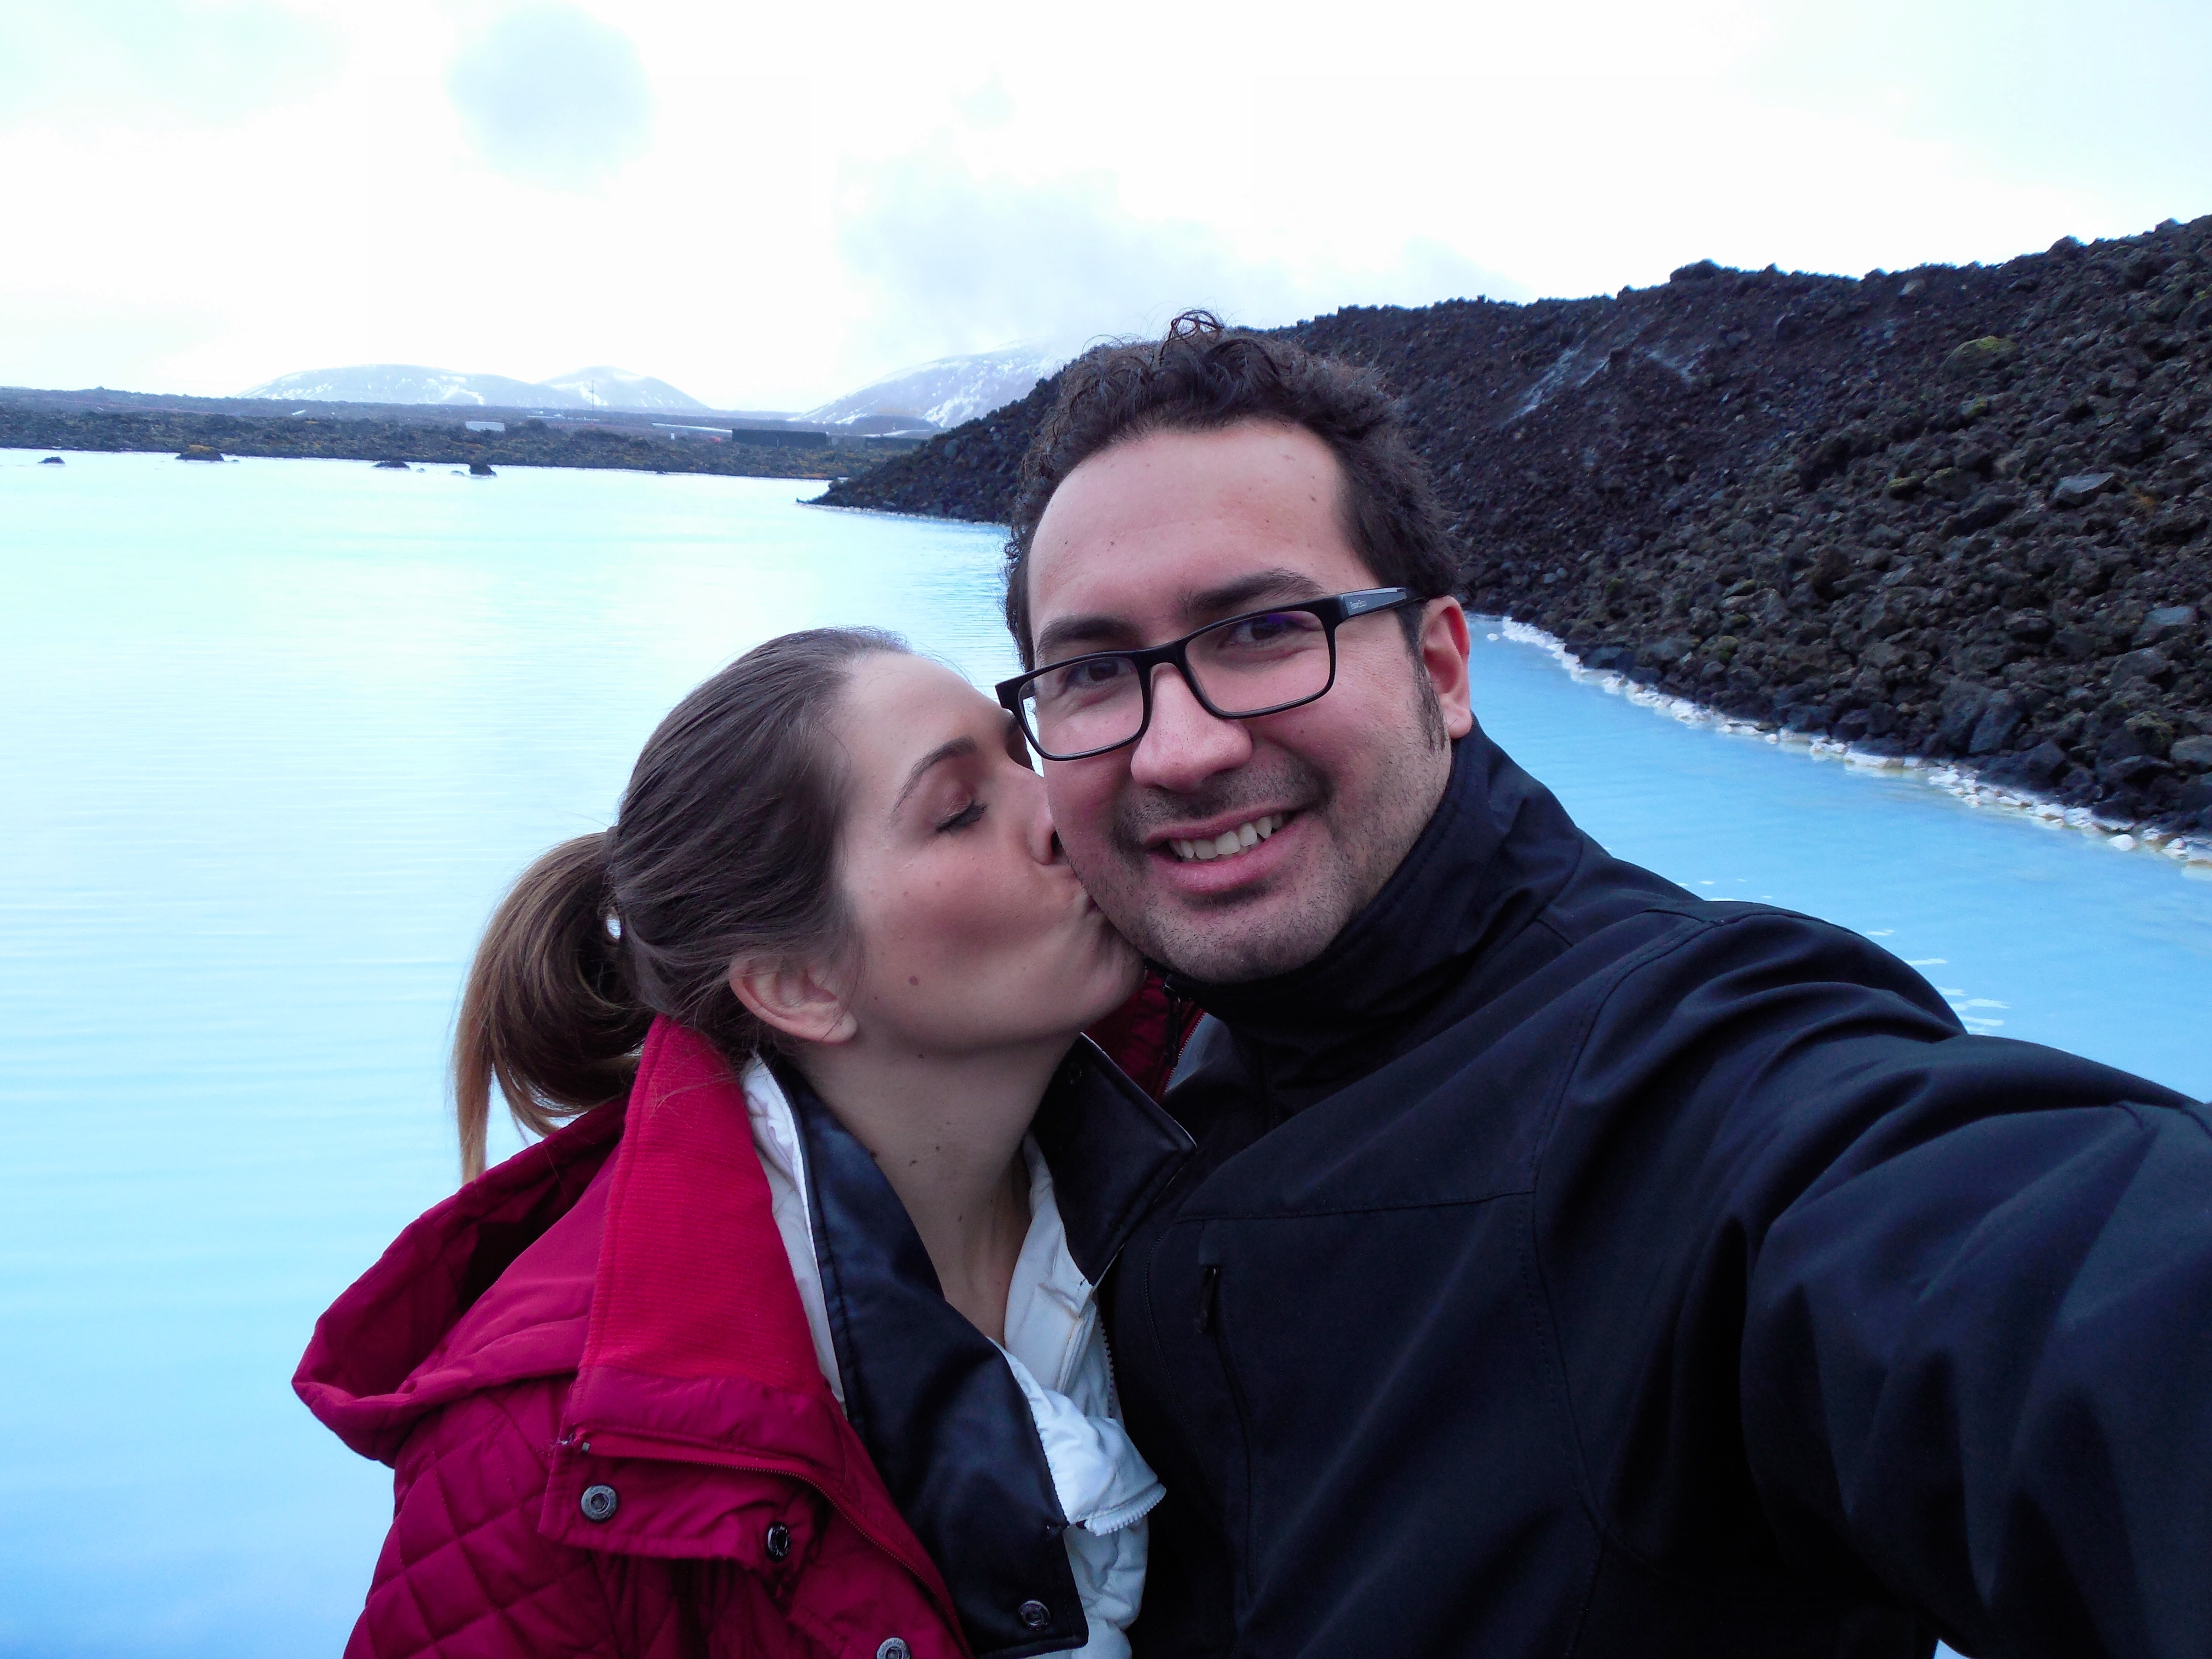 Outside the Blue Lagoon in Reykjavik, Iceland